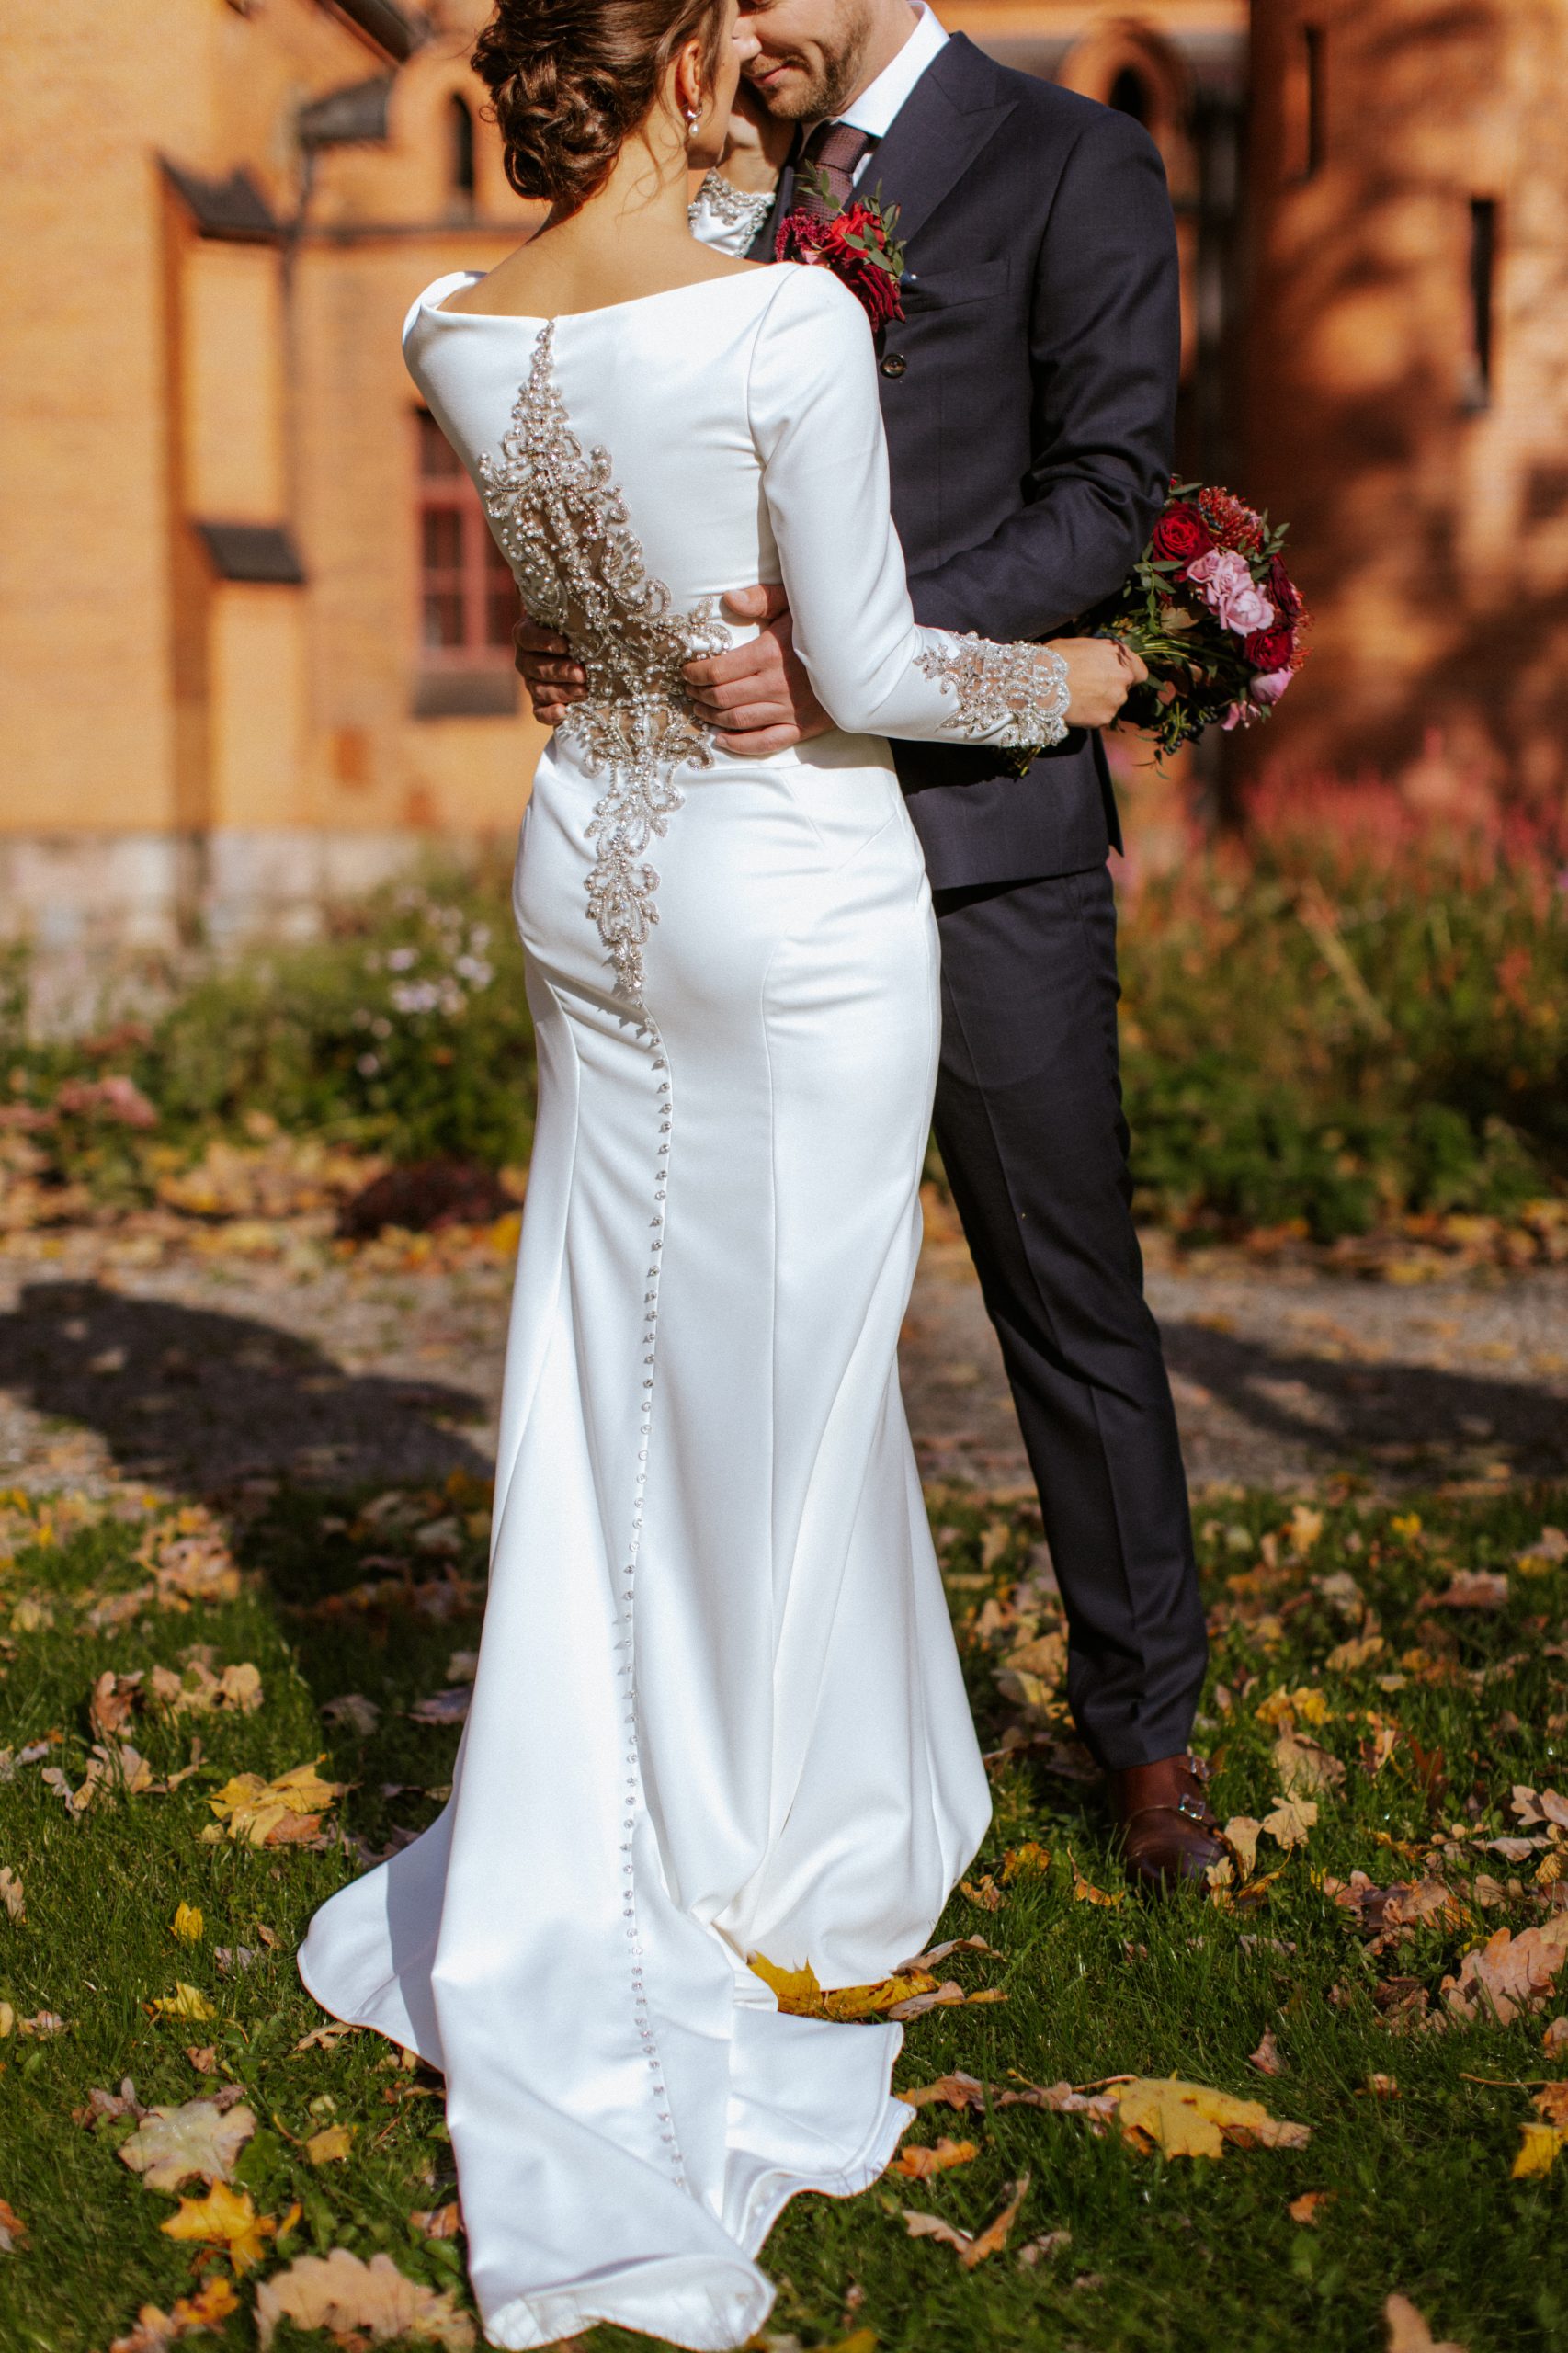 Bride In Crepe Wedding Dress Called Aston By Sottero And Midgley